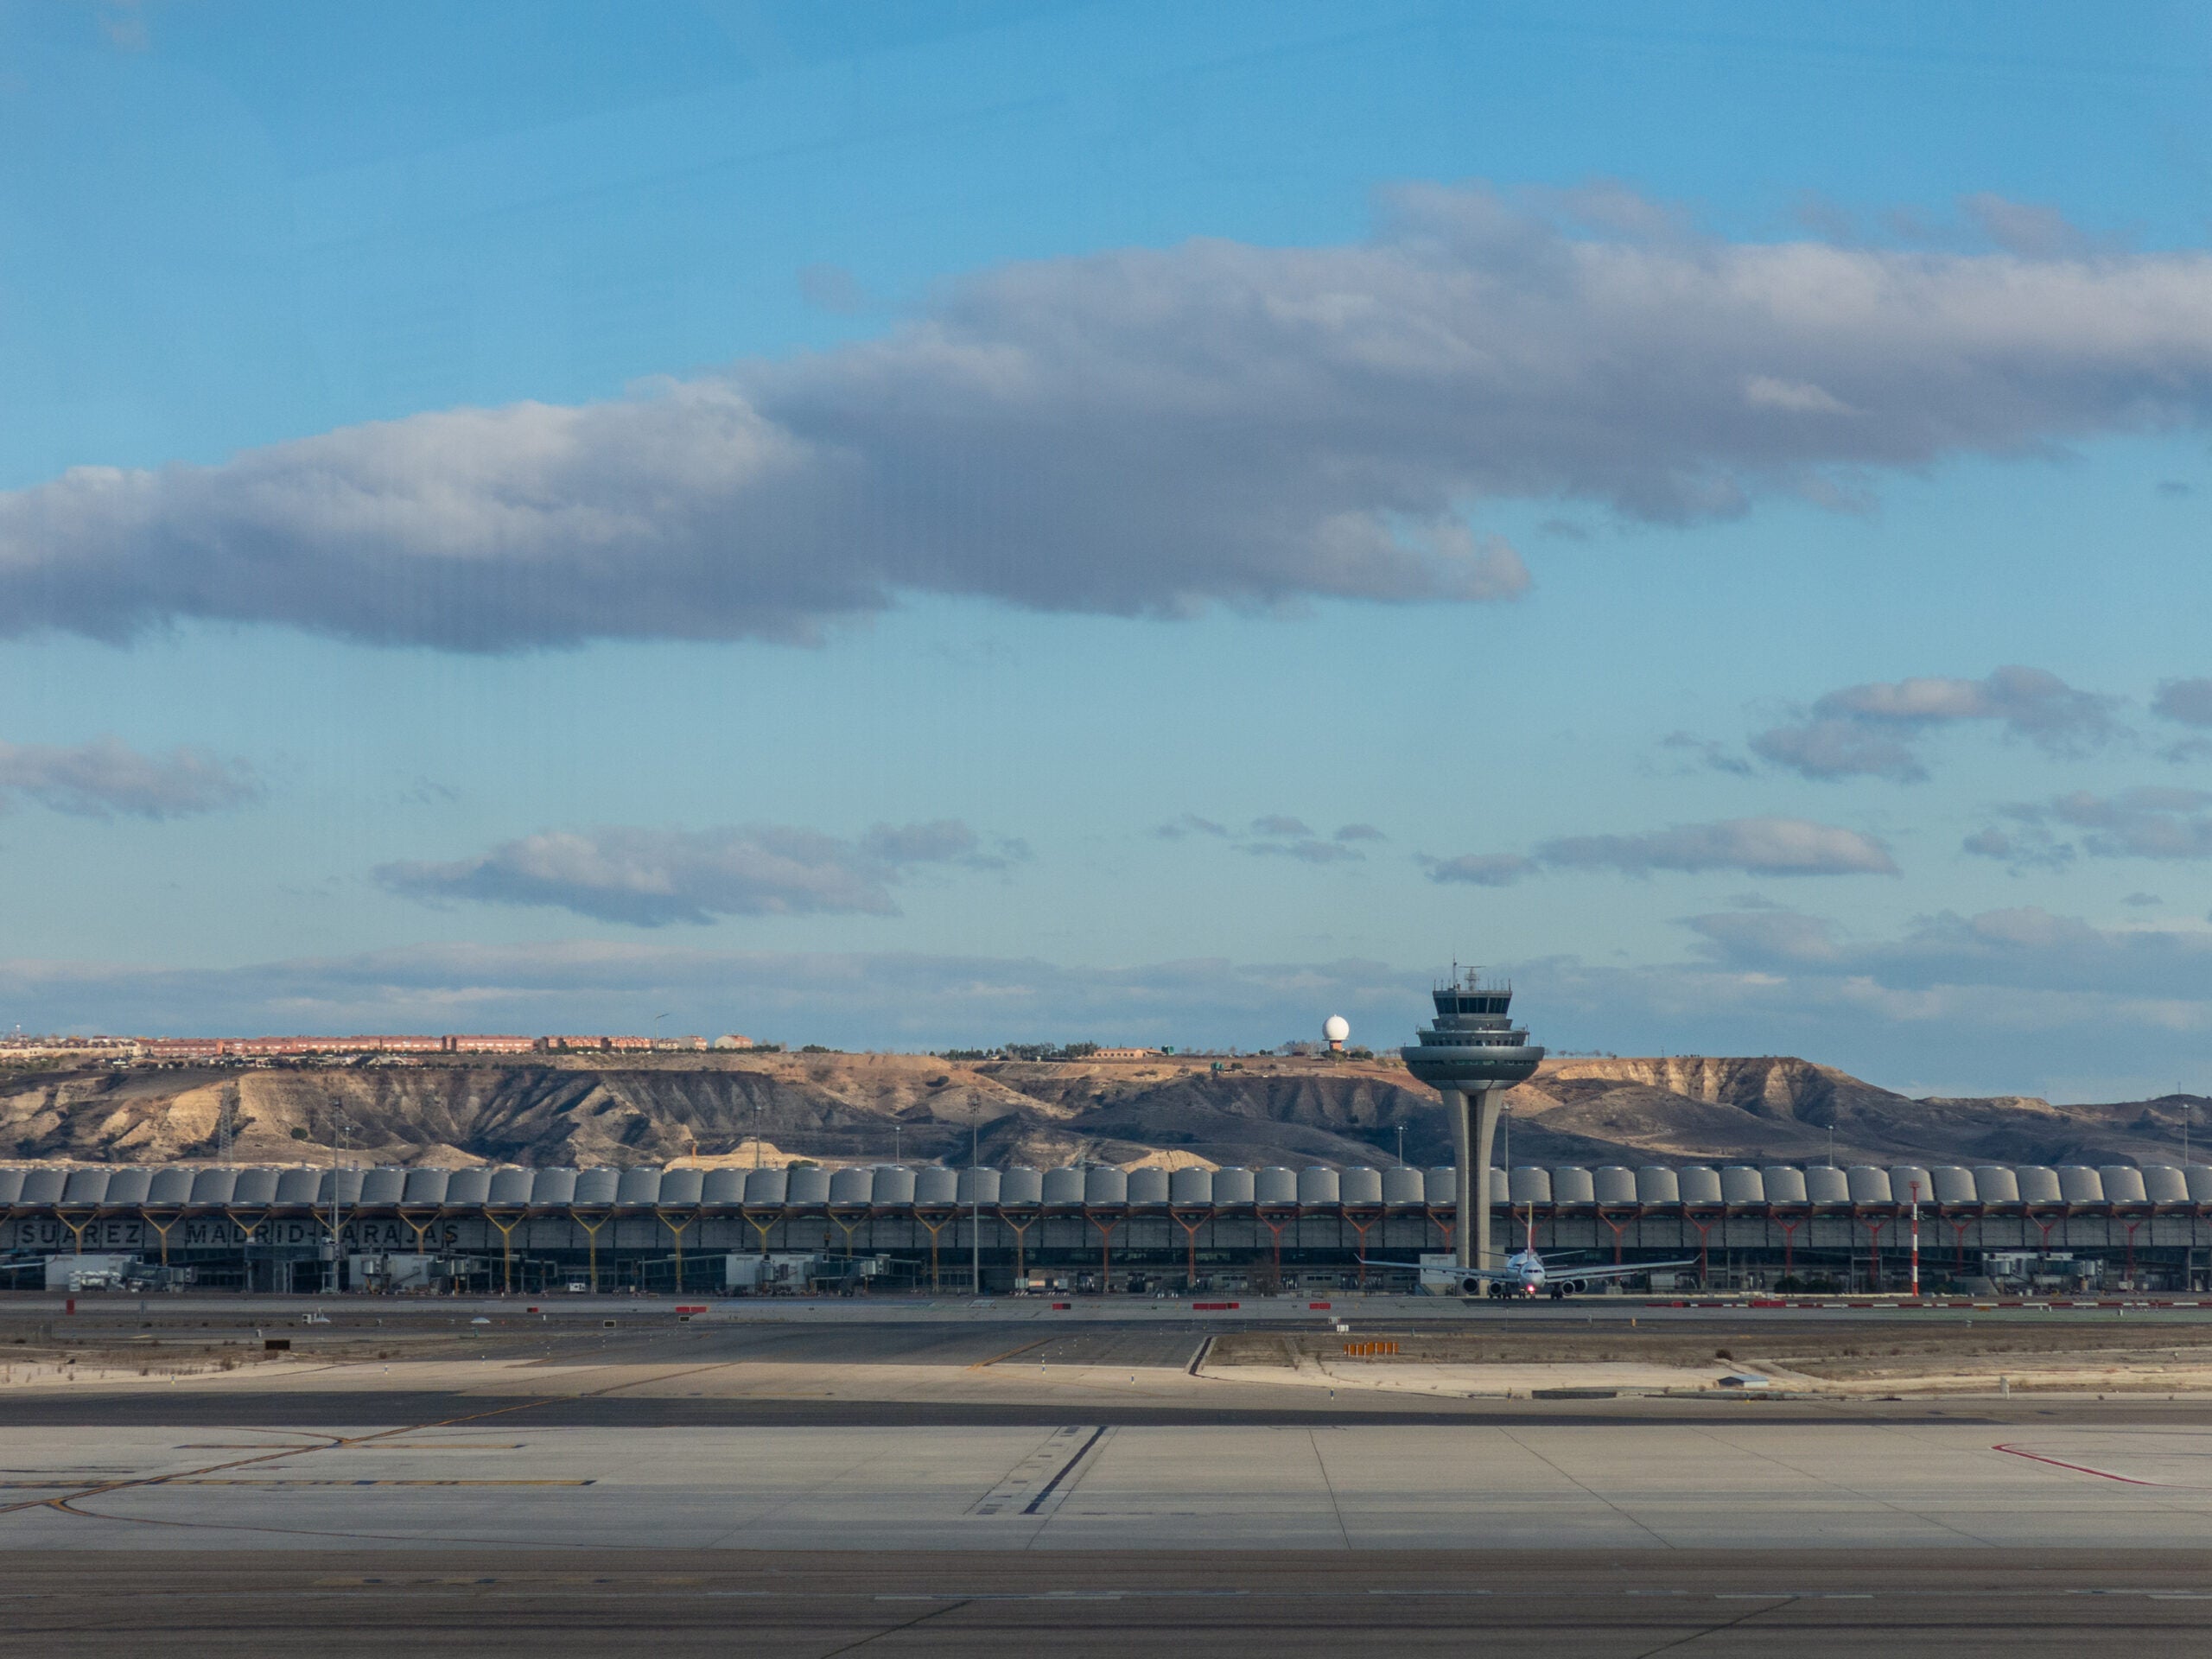 A plane prepares to take off on the runway of Terminal T4 the Adolfo Suarez Madrid Barajas Airport. Barajas is the main international airport serving Madrid in Spain.